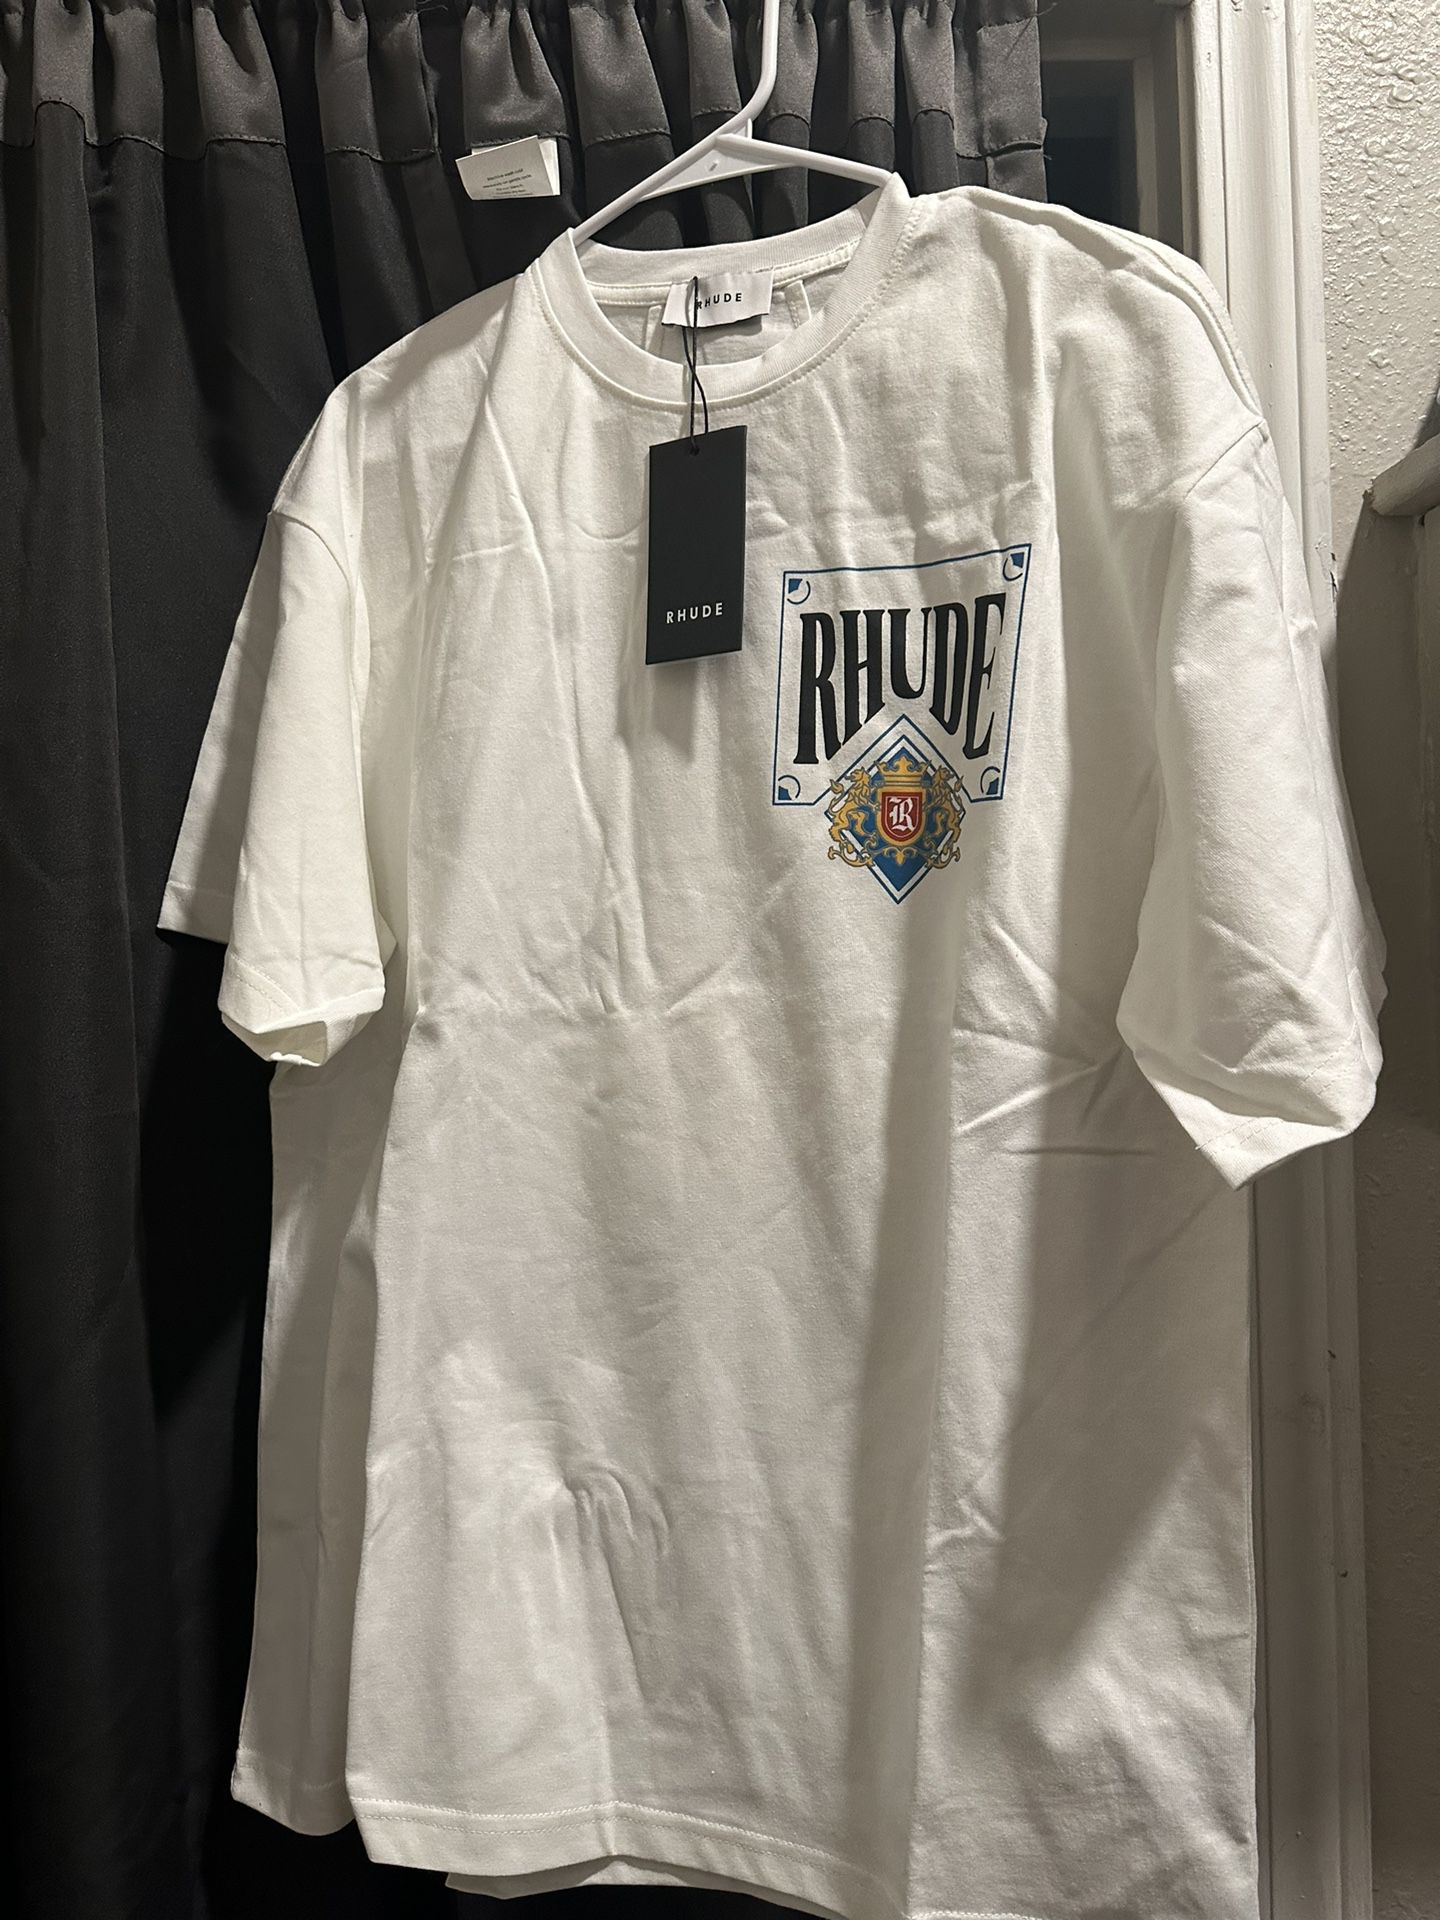 Rhude Tshirts New Season Any Colors for Sale in Fort Lauderdale, FL -  OfferUp